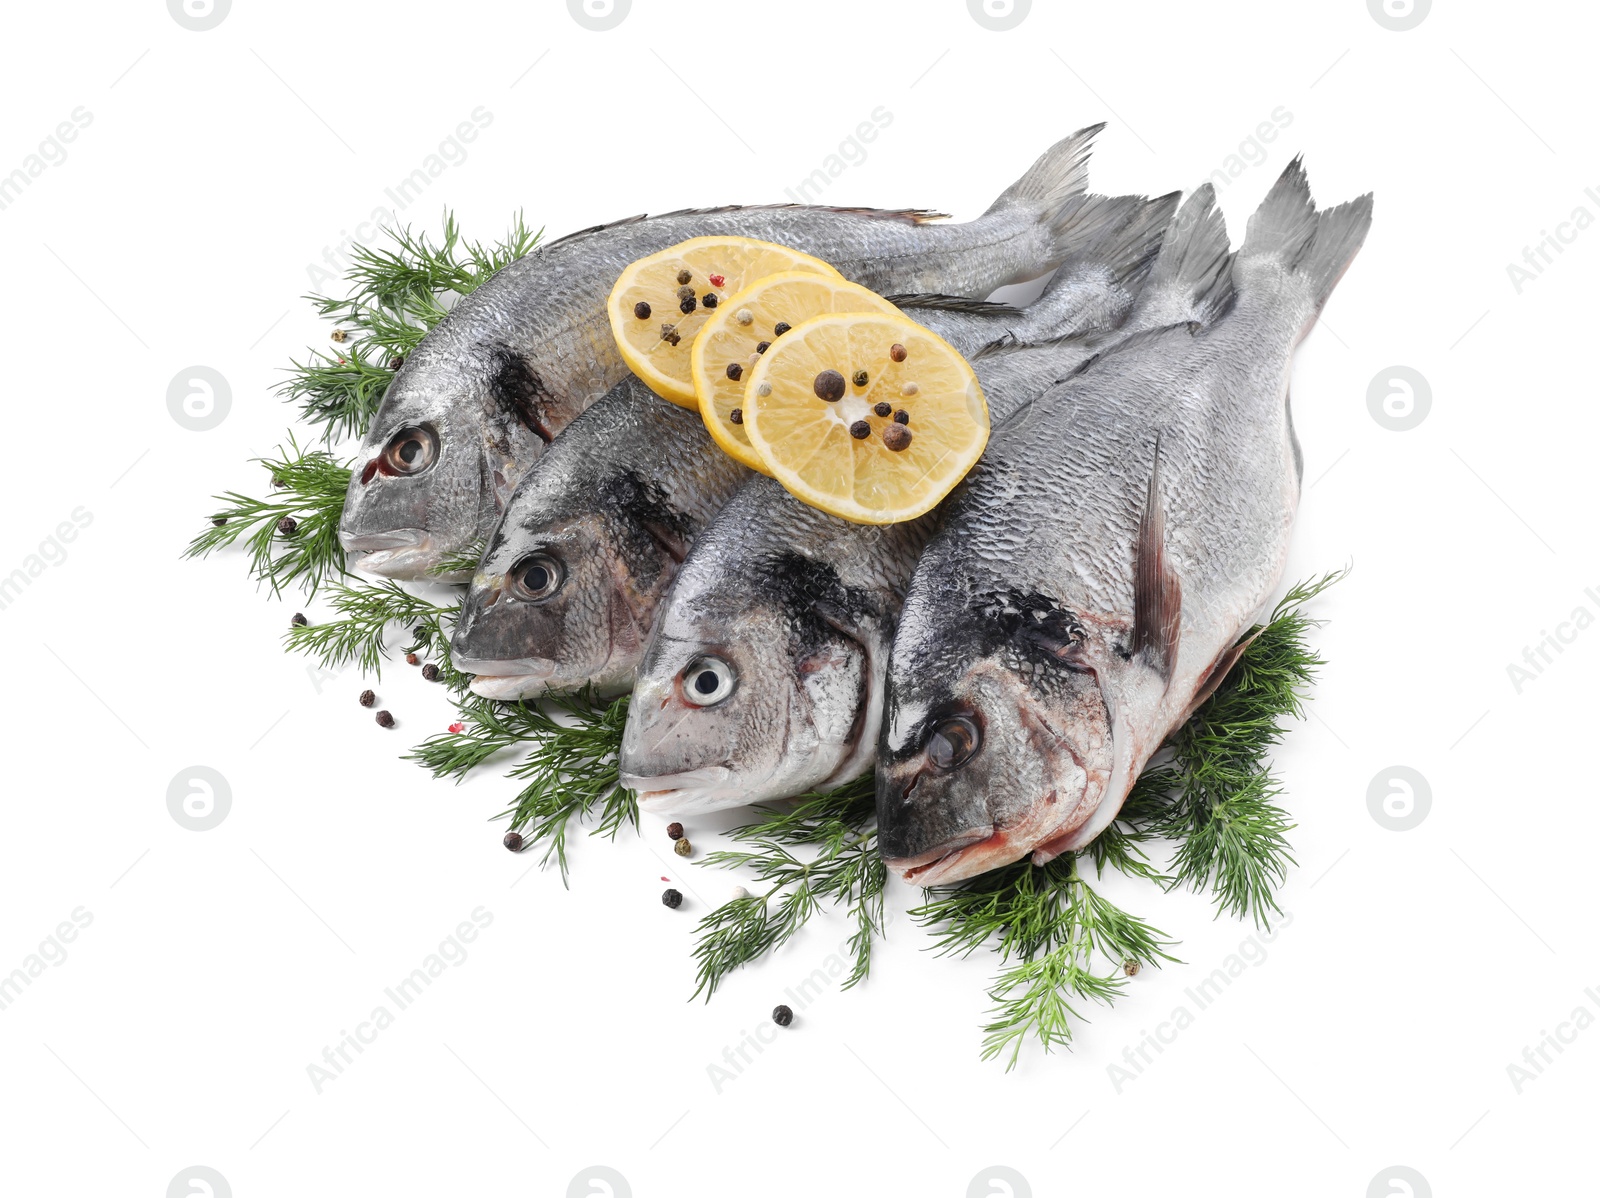 Photo of Raw dorado fish, dill, lemon slices and peppercorns isolated on white